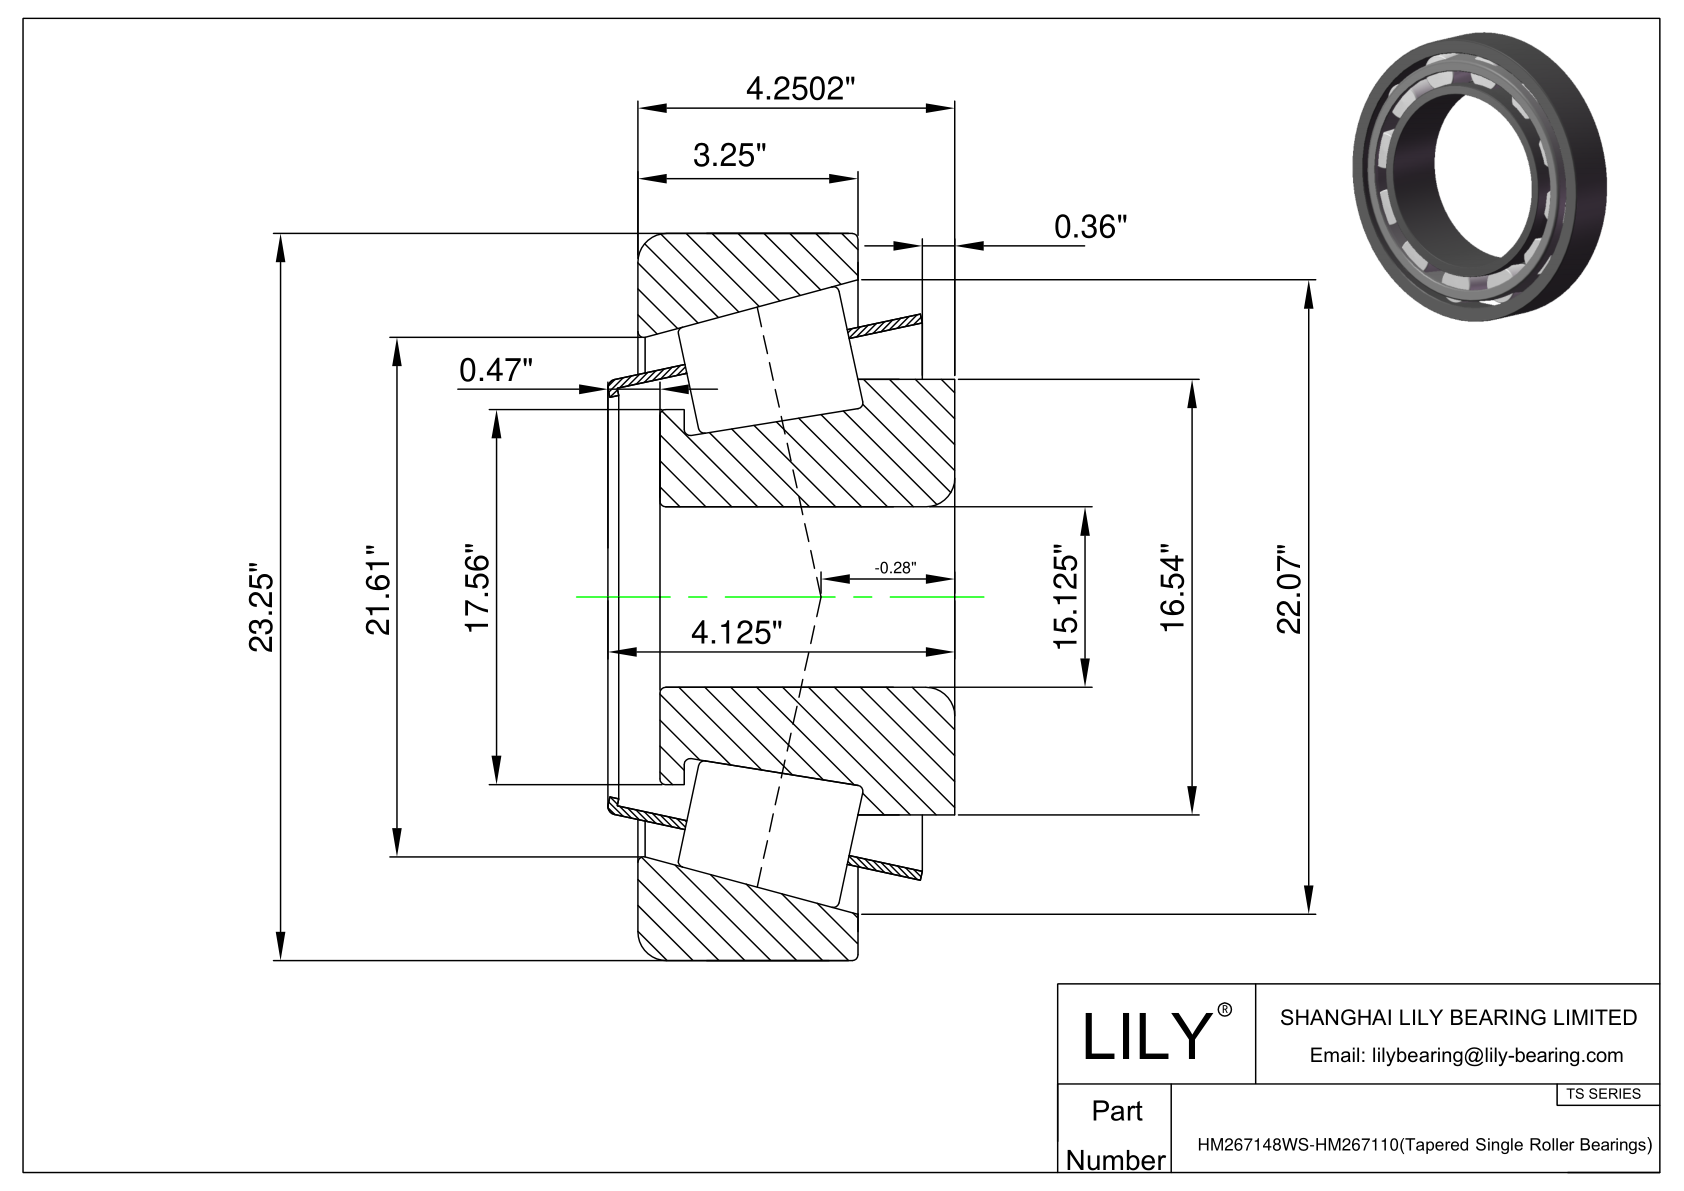 HM267148WS-HM267110 TS (Tapered Single Roller Bearings) (Imperial) cad drawing